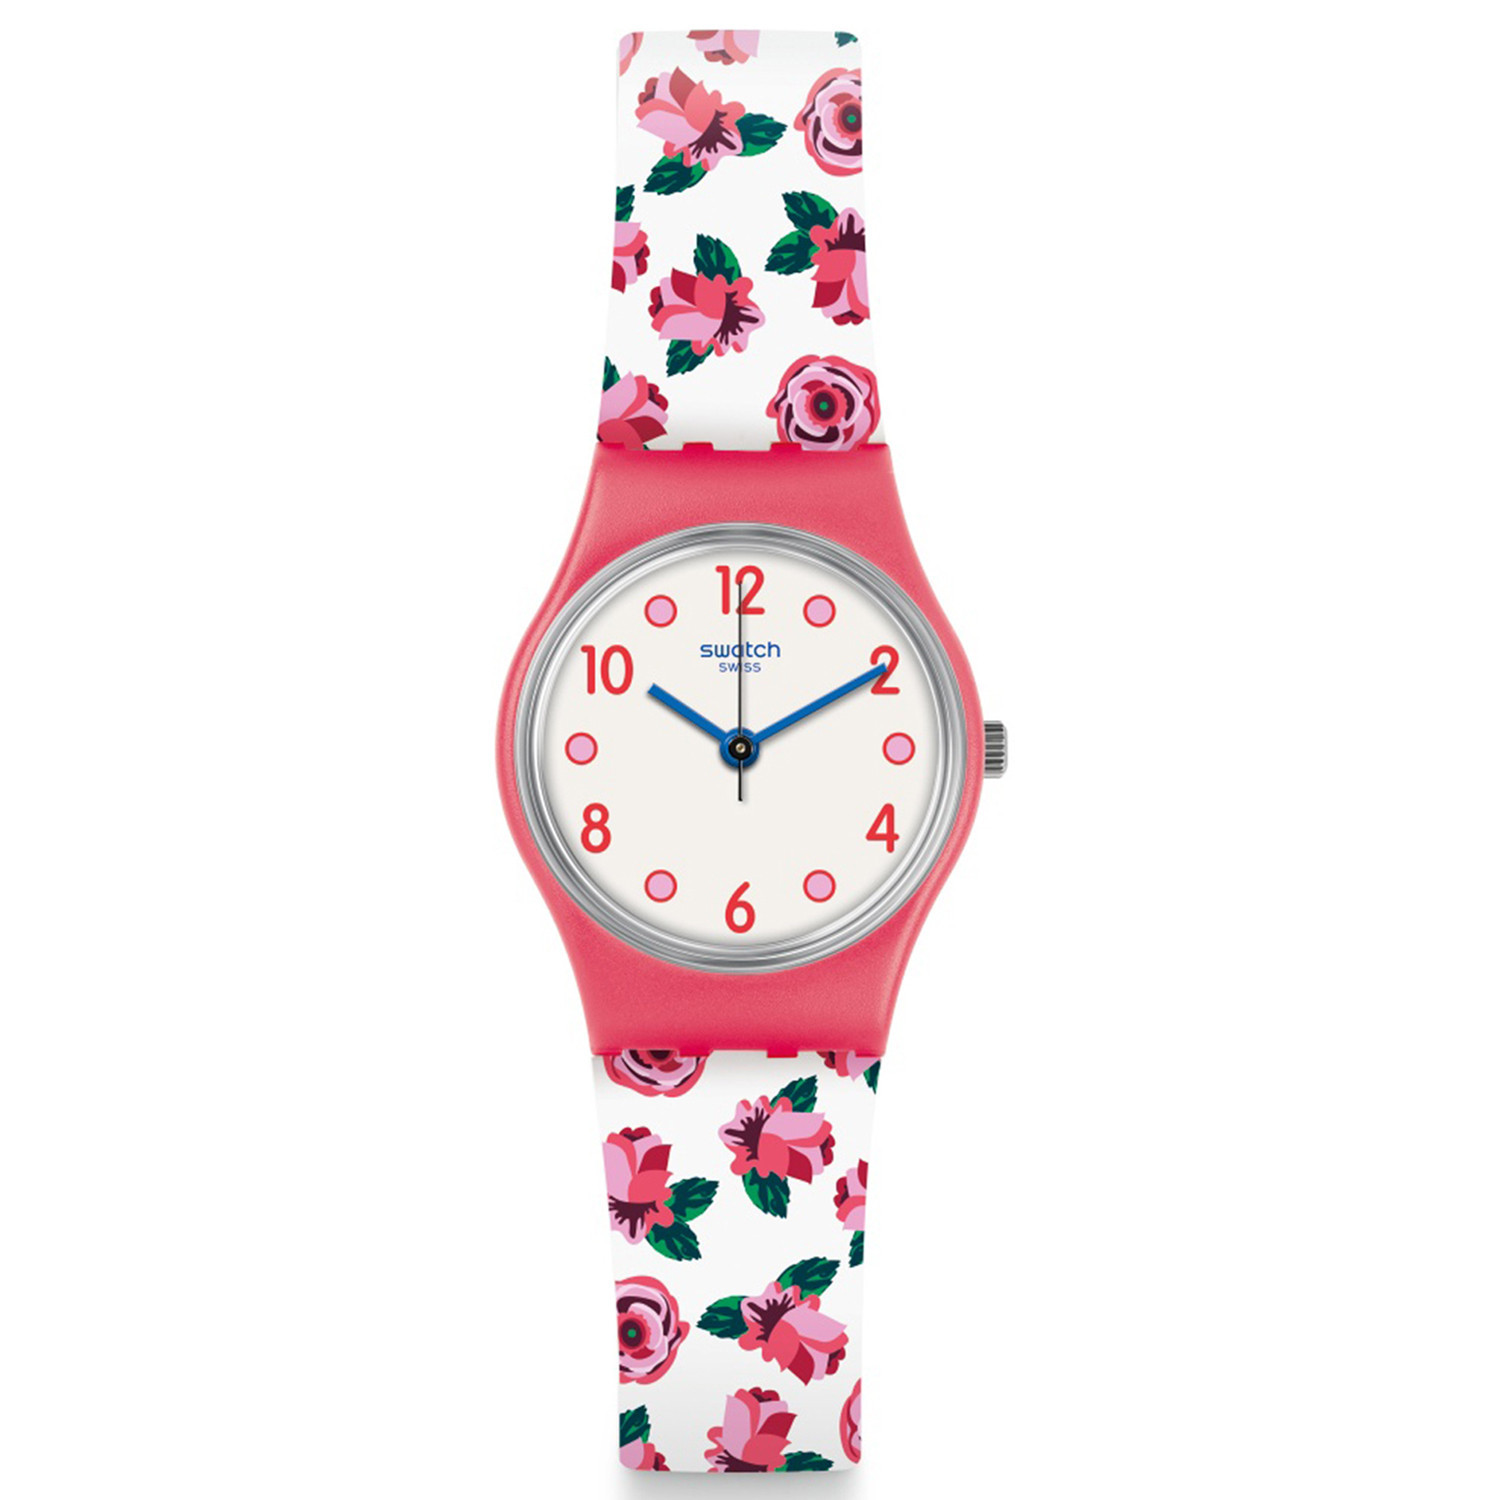 Montre femme Swatch Spring crush
collection I Love Your Folk